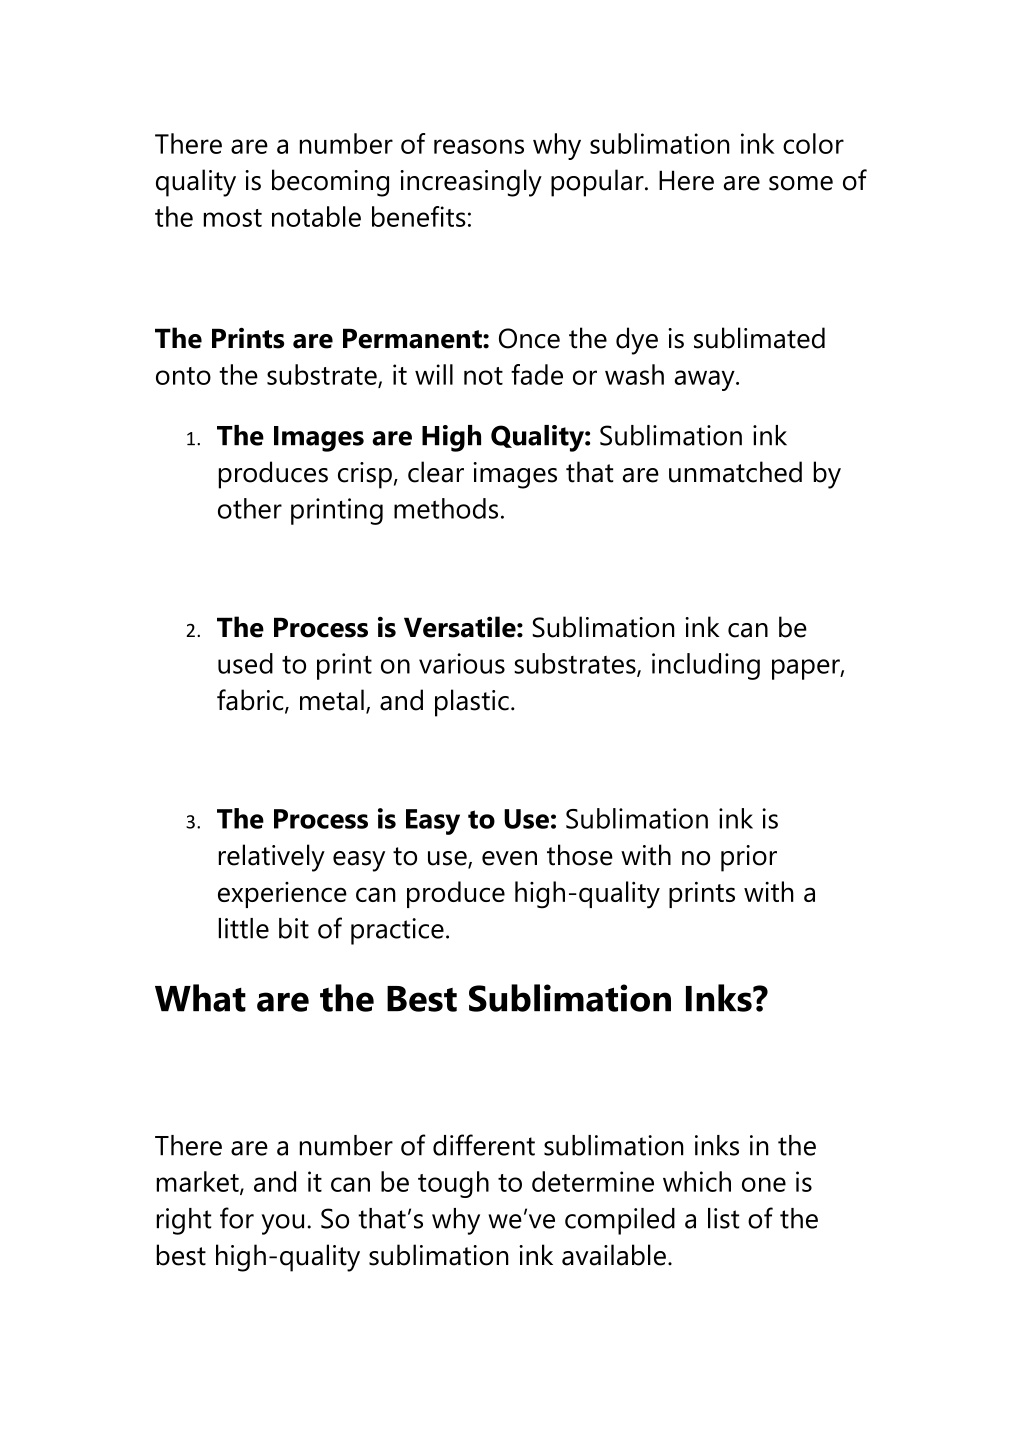 Ppt Best Sublimation Ink For Your Printer Buyers Guide Powerpoint Presentation Id11450870 7526